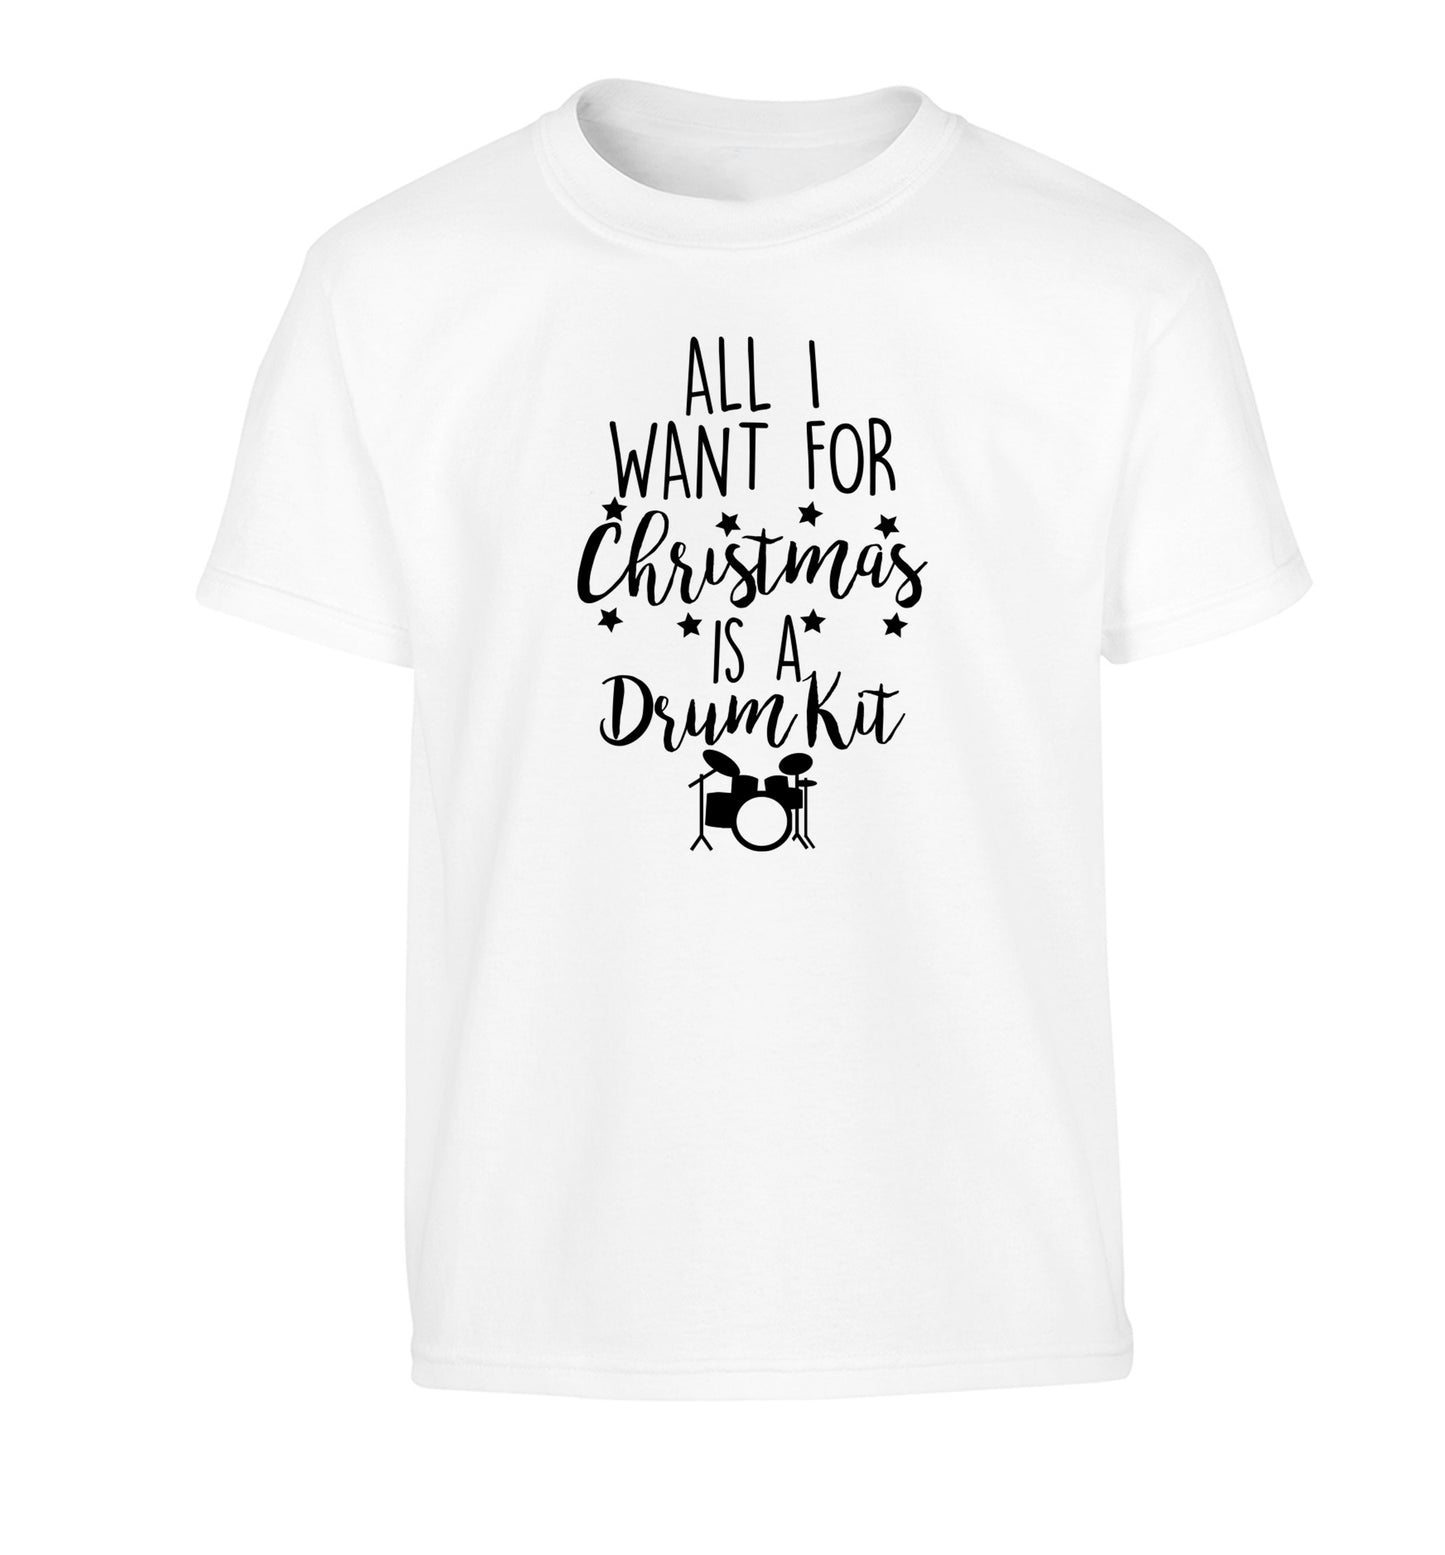 All I want for Christmas is a drum kit! Children's white Tshirt 12-14 Years